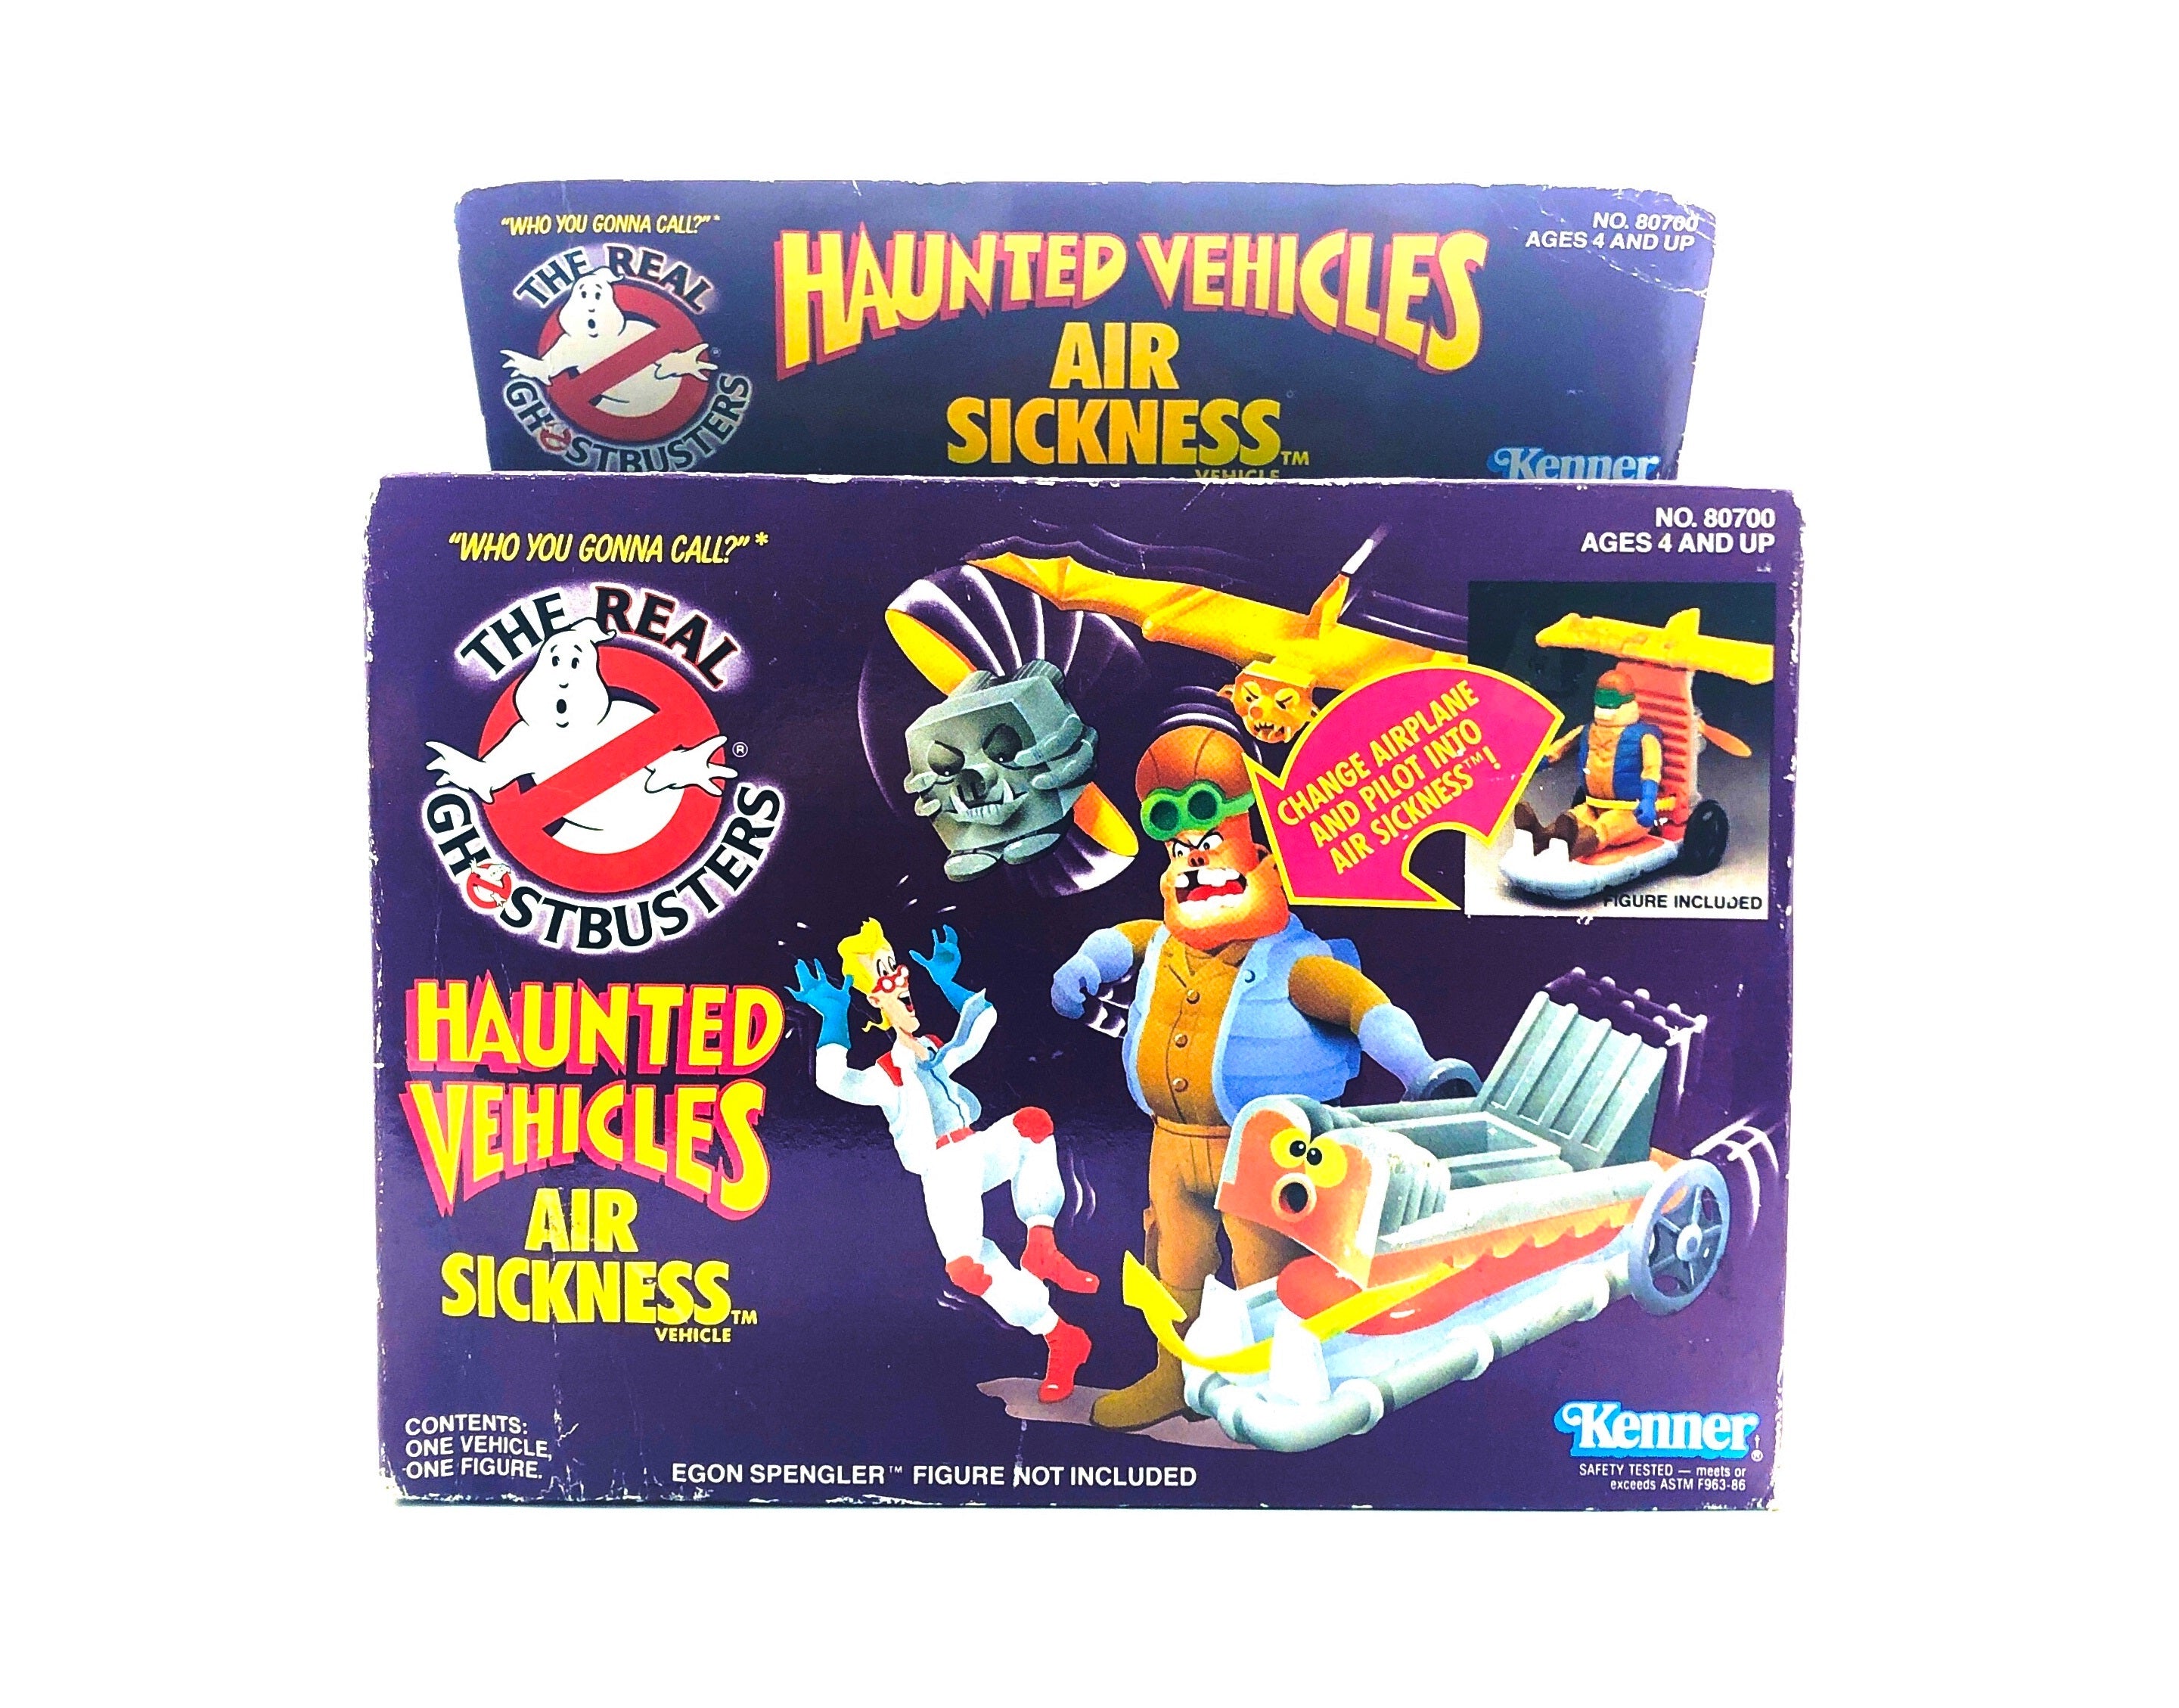 The Real Ghostbusters Haunted Vehicle Air Sickness (Kenner, 1986)